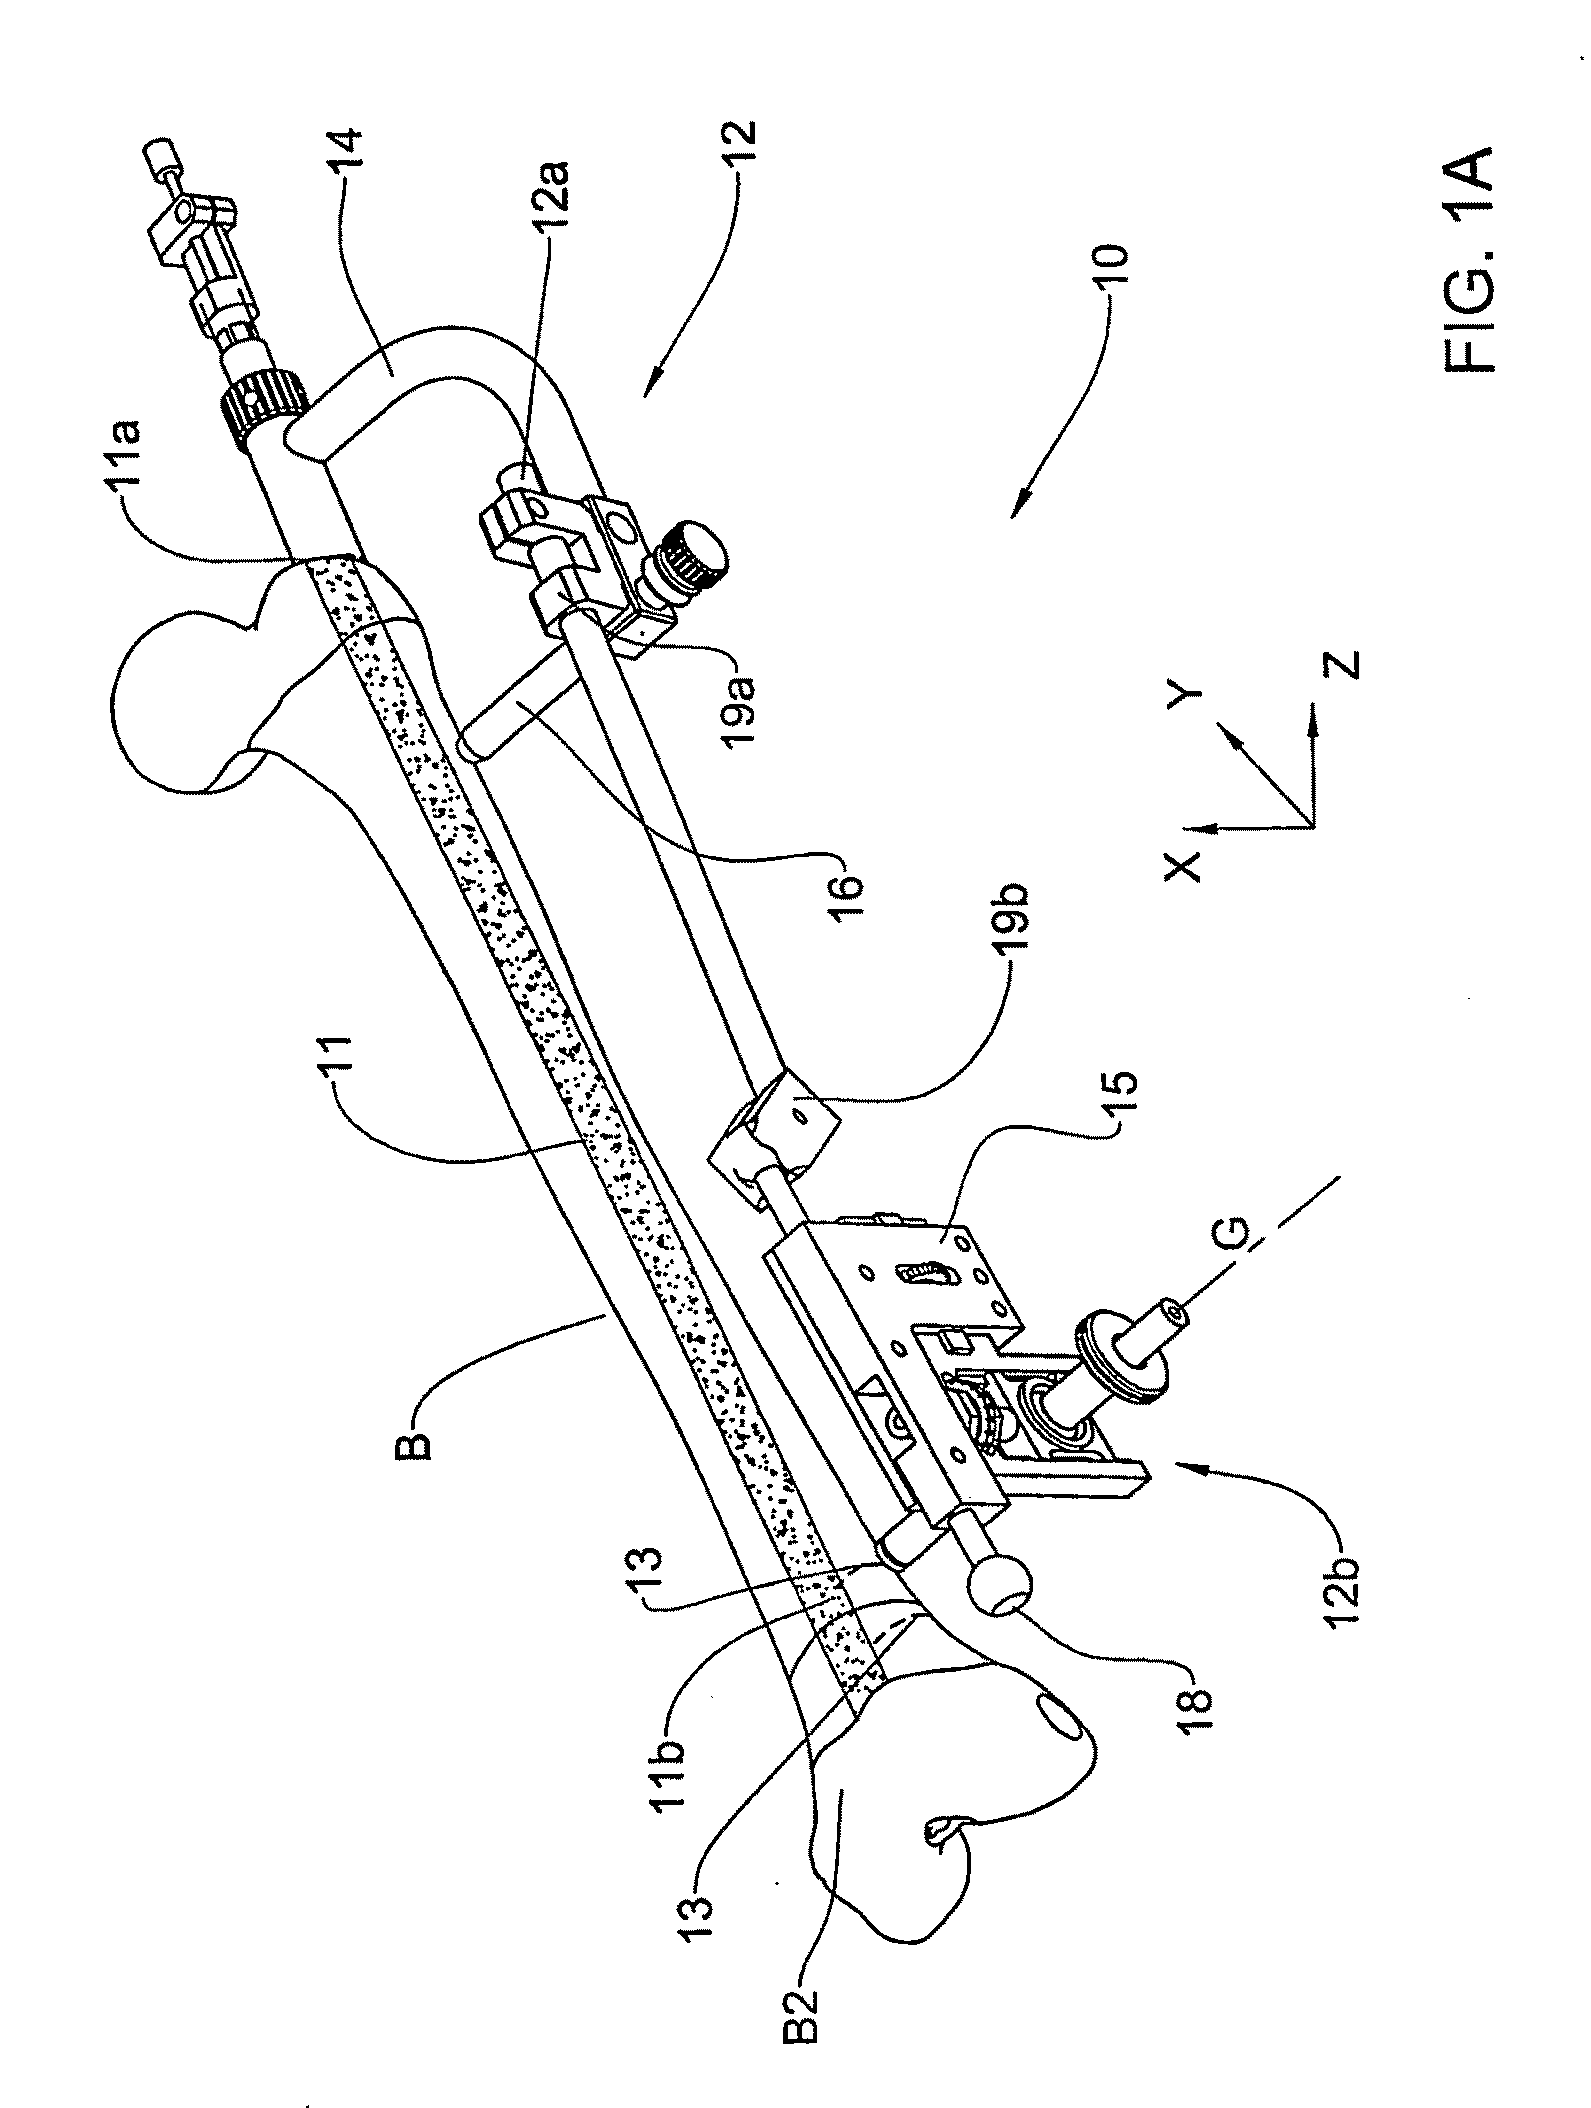 System and Method for Locating of Distal Holes of an Intramedullary Nail